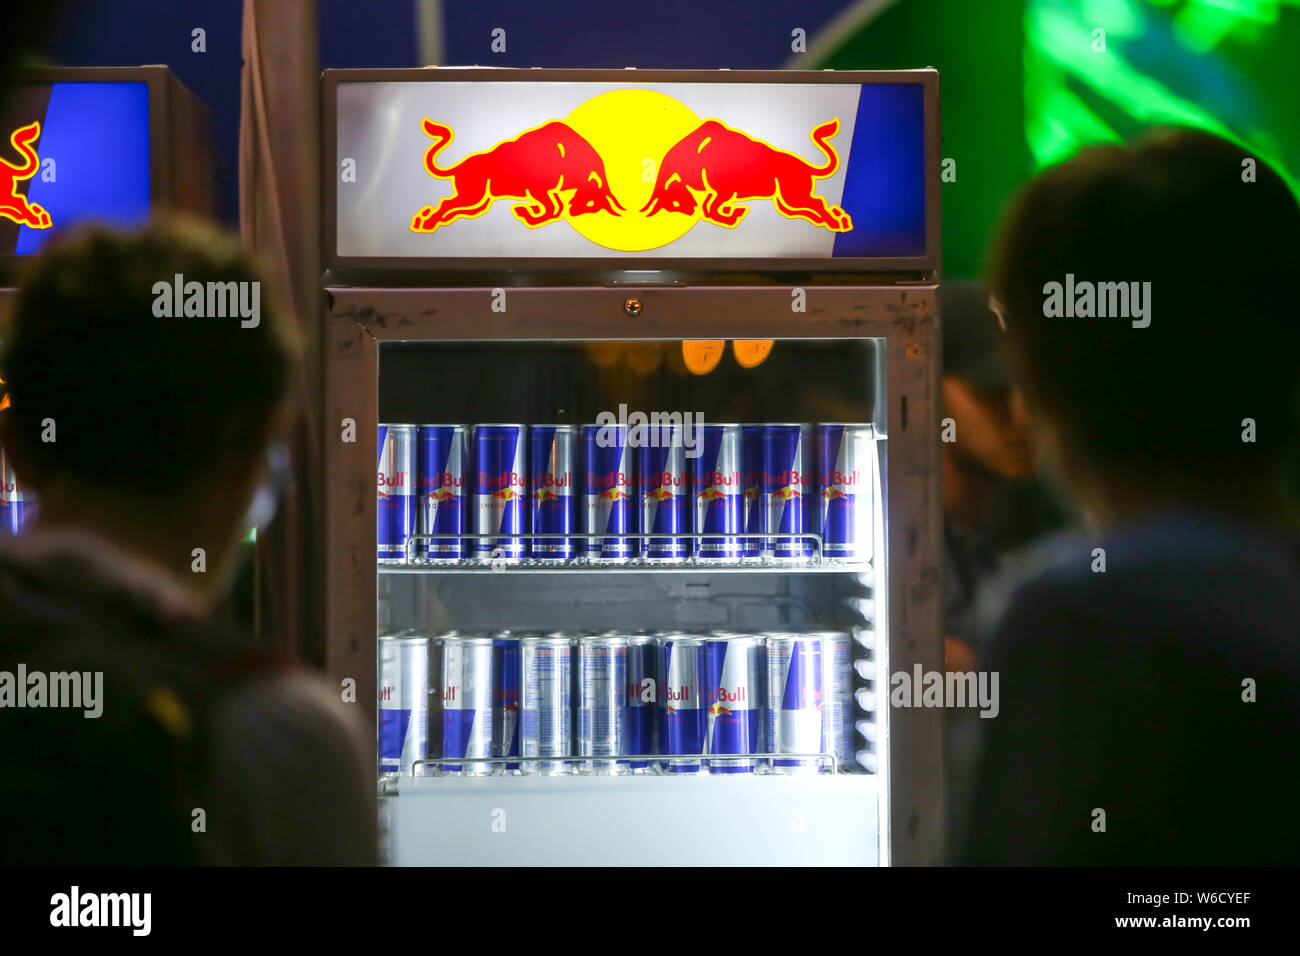 Brezje Croatia 19th July 19 People On The Red Bull Bar With Fridge Full Of Red Bull Energy Drink On The Forestland Ultimate Forest Electronic Stock Photo Alamy